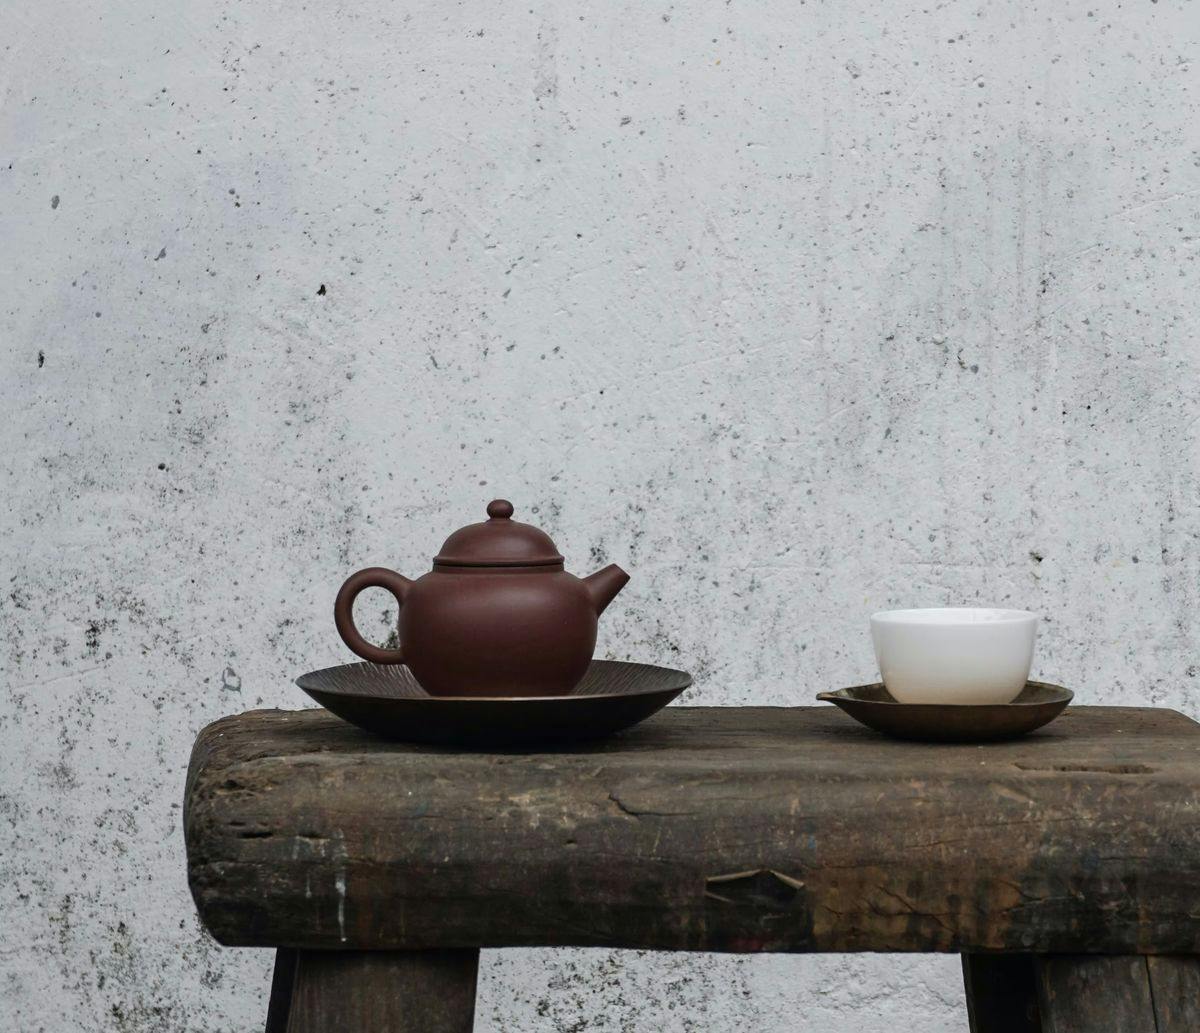 A teapot and tea cup sit atop a wooden table, by Oriento via Unsplash